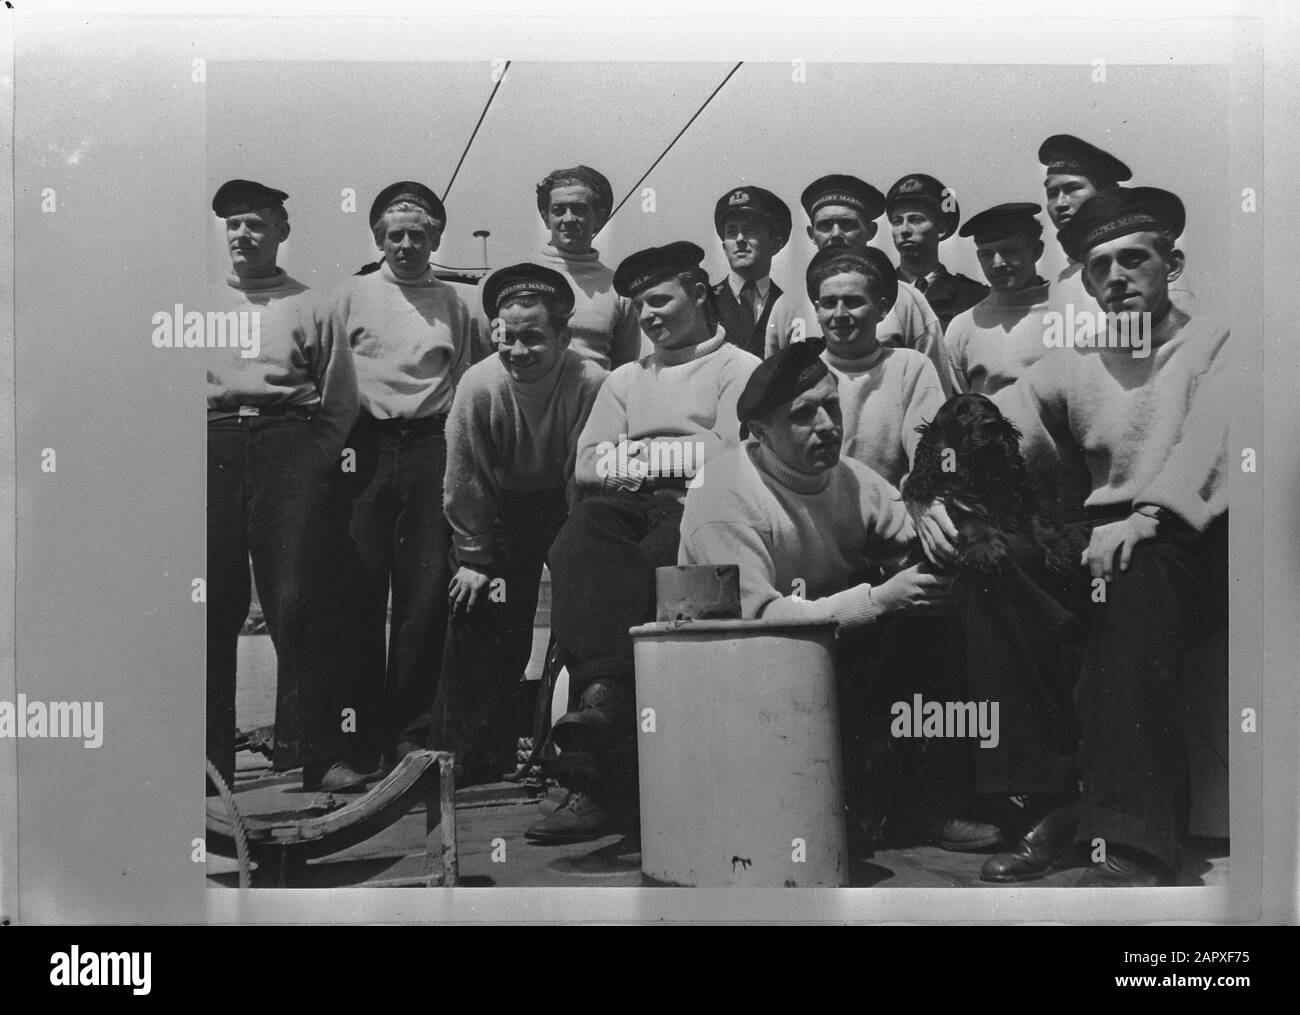 NAVY [Navy] Anefo London series  Series: Dutch motor torpedo boats [MTB] in Great Britain. Crew of one of the MTB's Annotation: Repronegative Date: July 1944 Location: Great Britain Keywords: crew, navy, warships, World War II Stock Photo